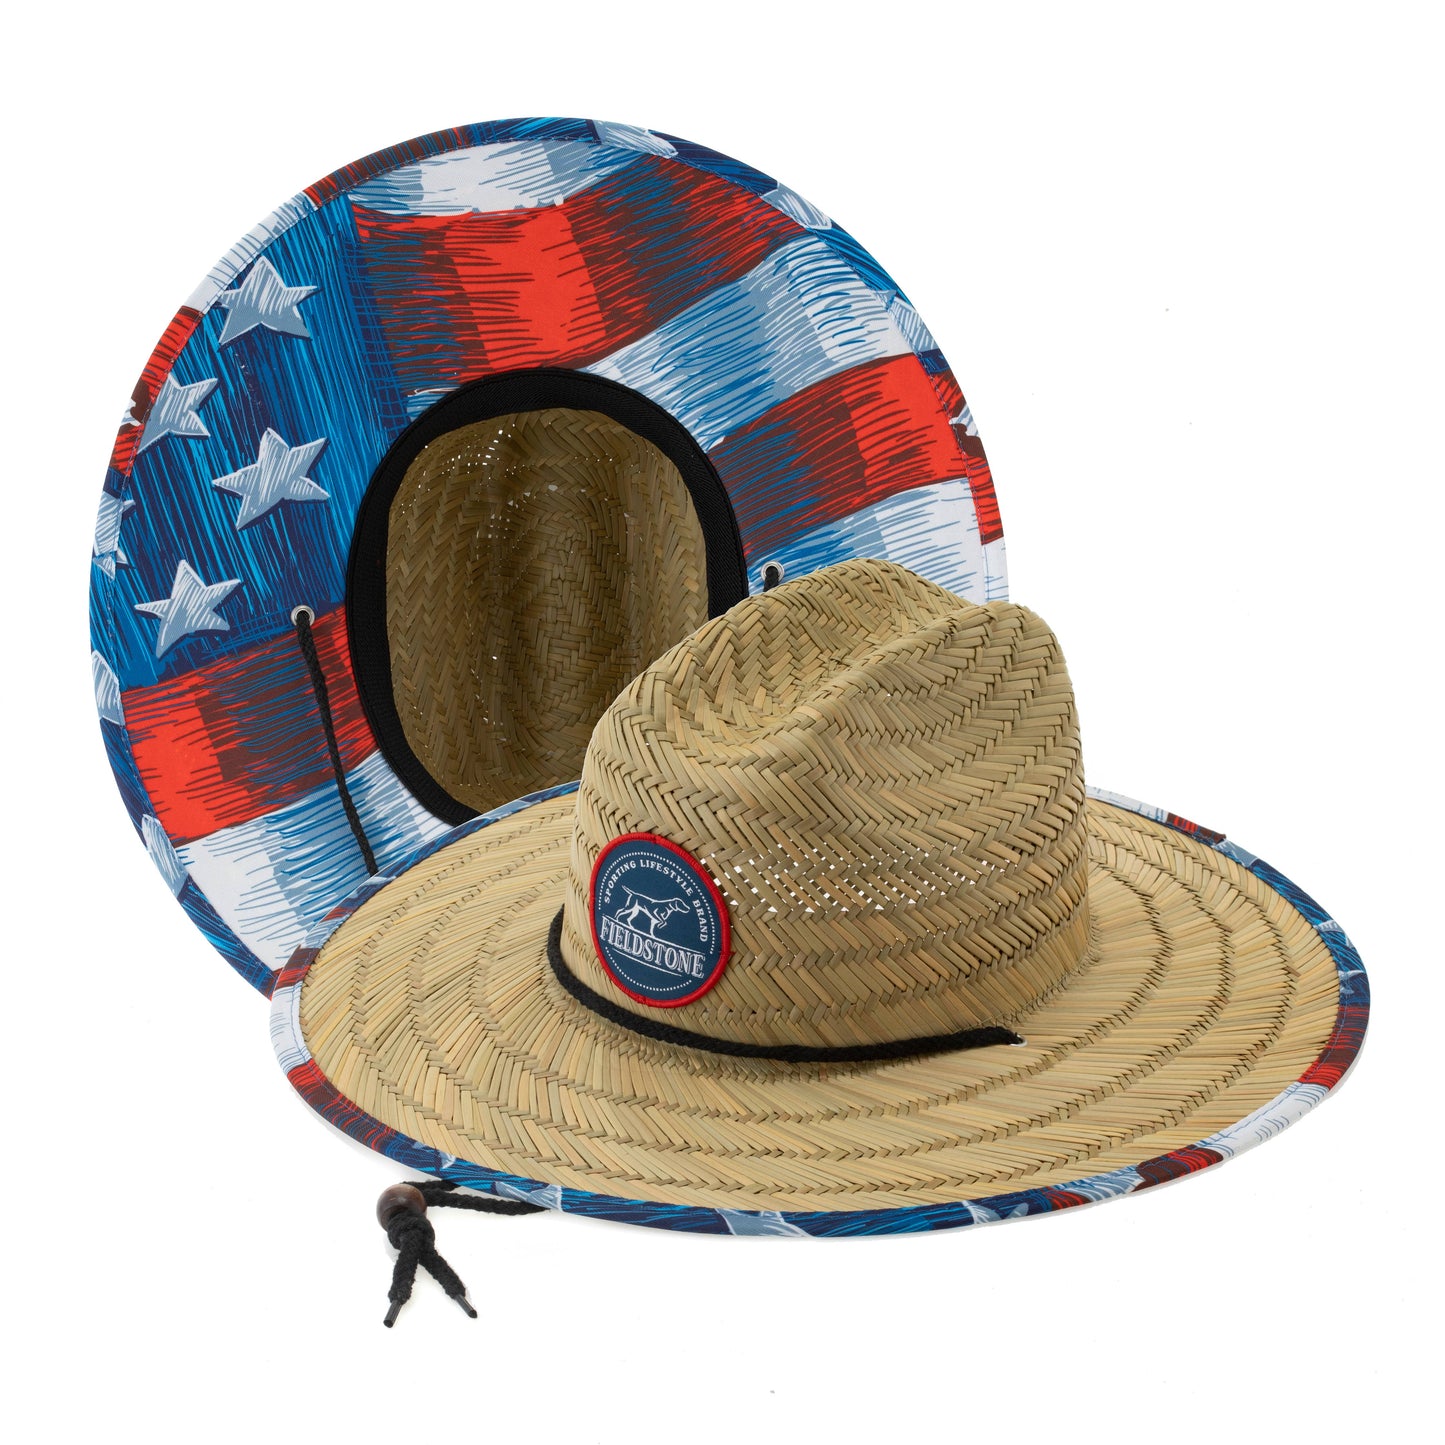 An Adult & Youth Straw Hat and a Fieldstone Outdoor Provisions Co. hat cover on a white background.